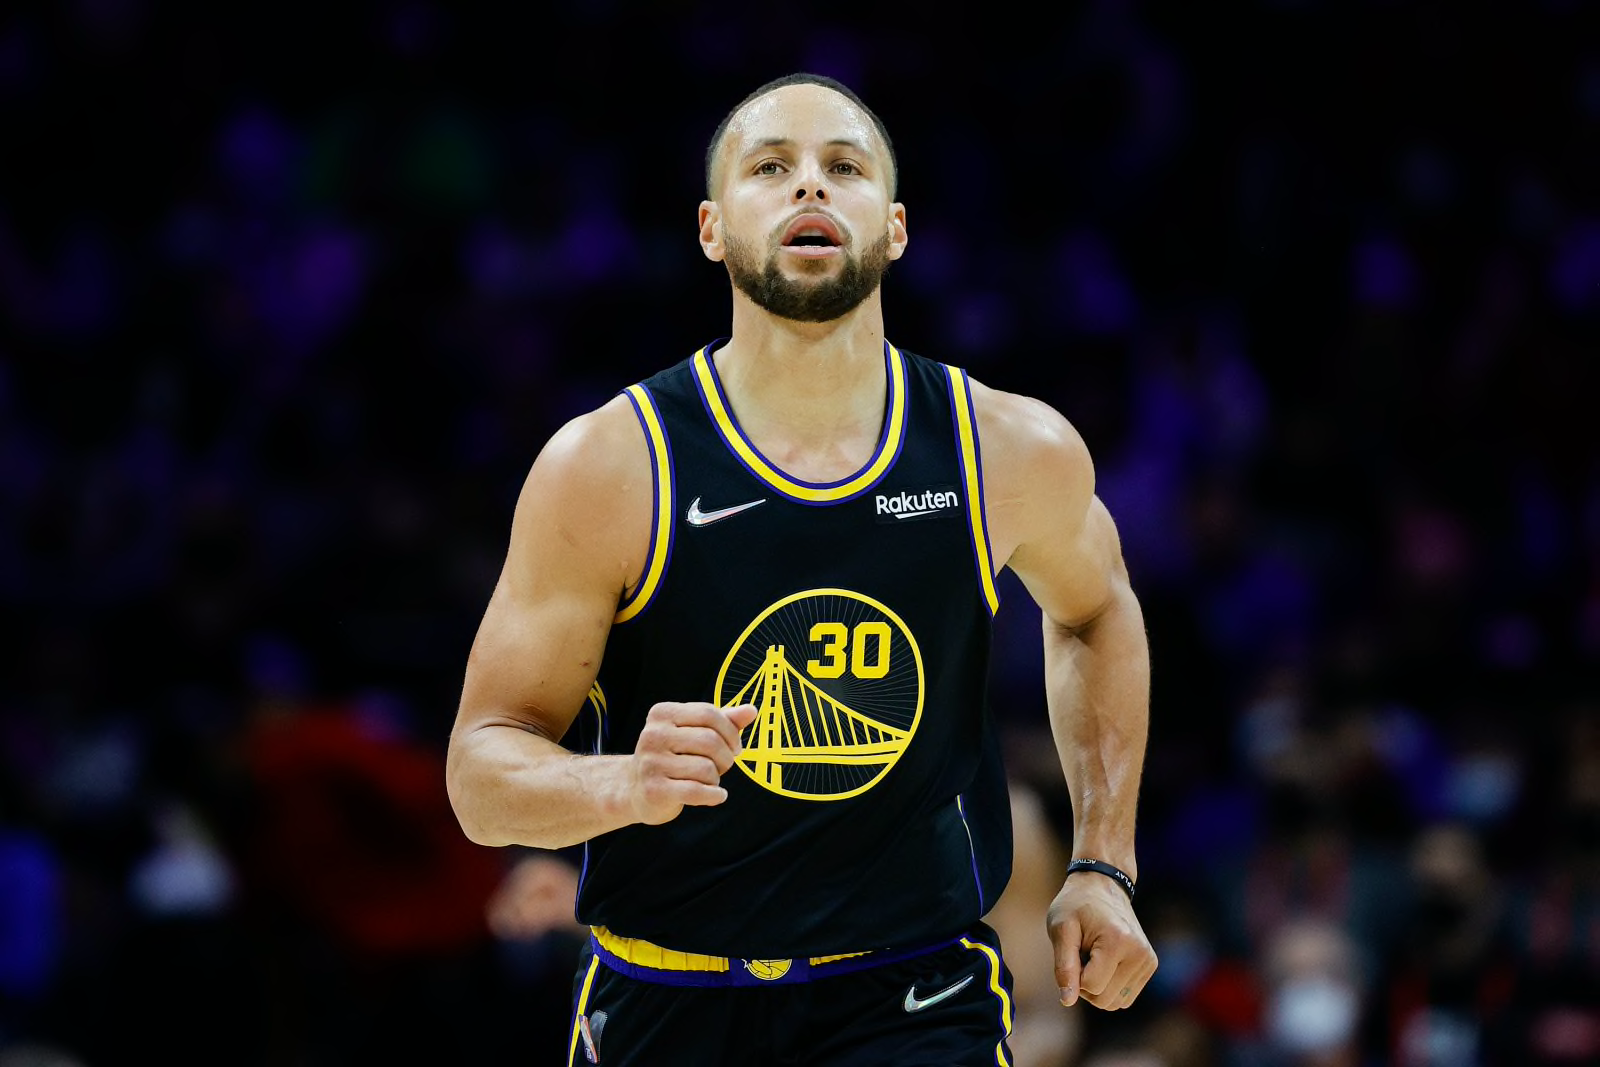 Steph Curry Sets NBA Career Record for 3-Pointers - The New York Times